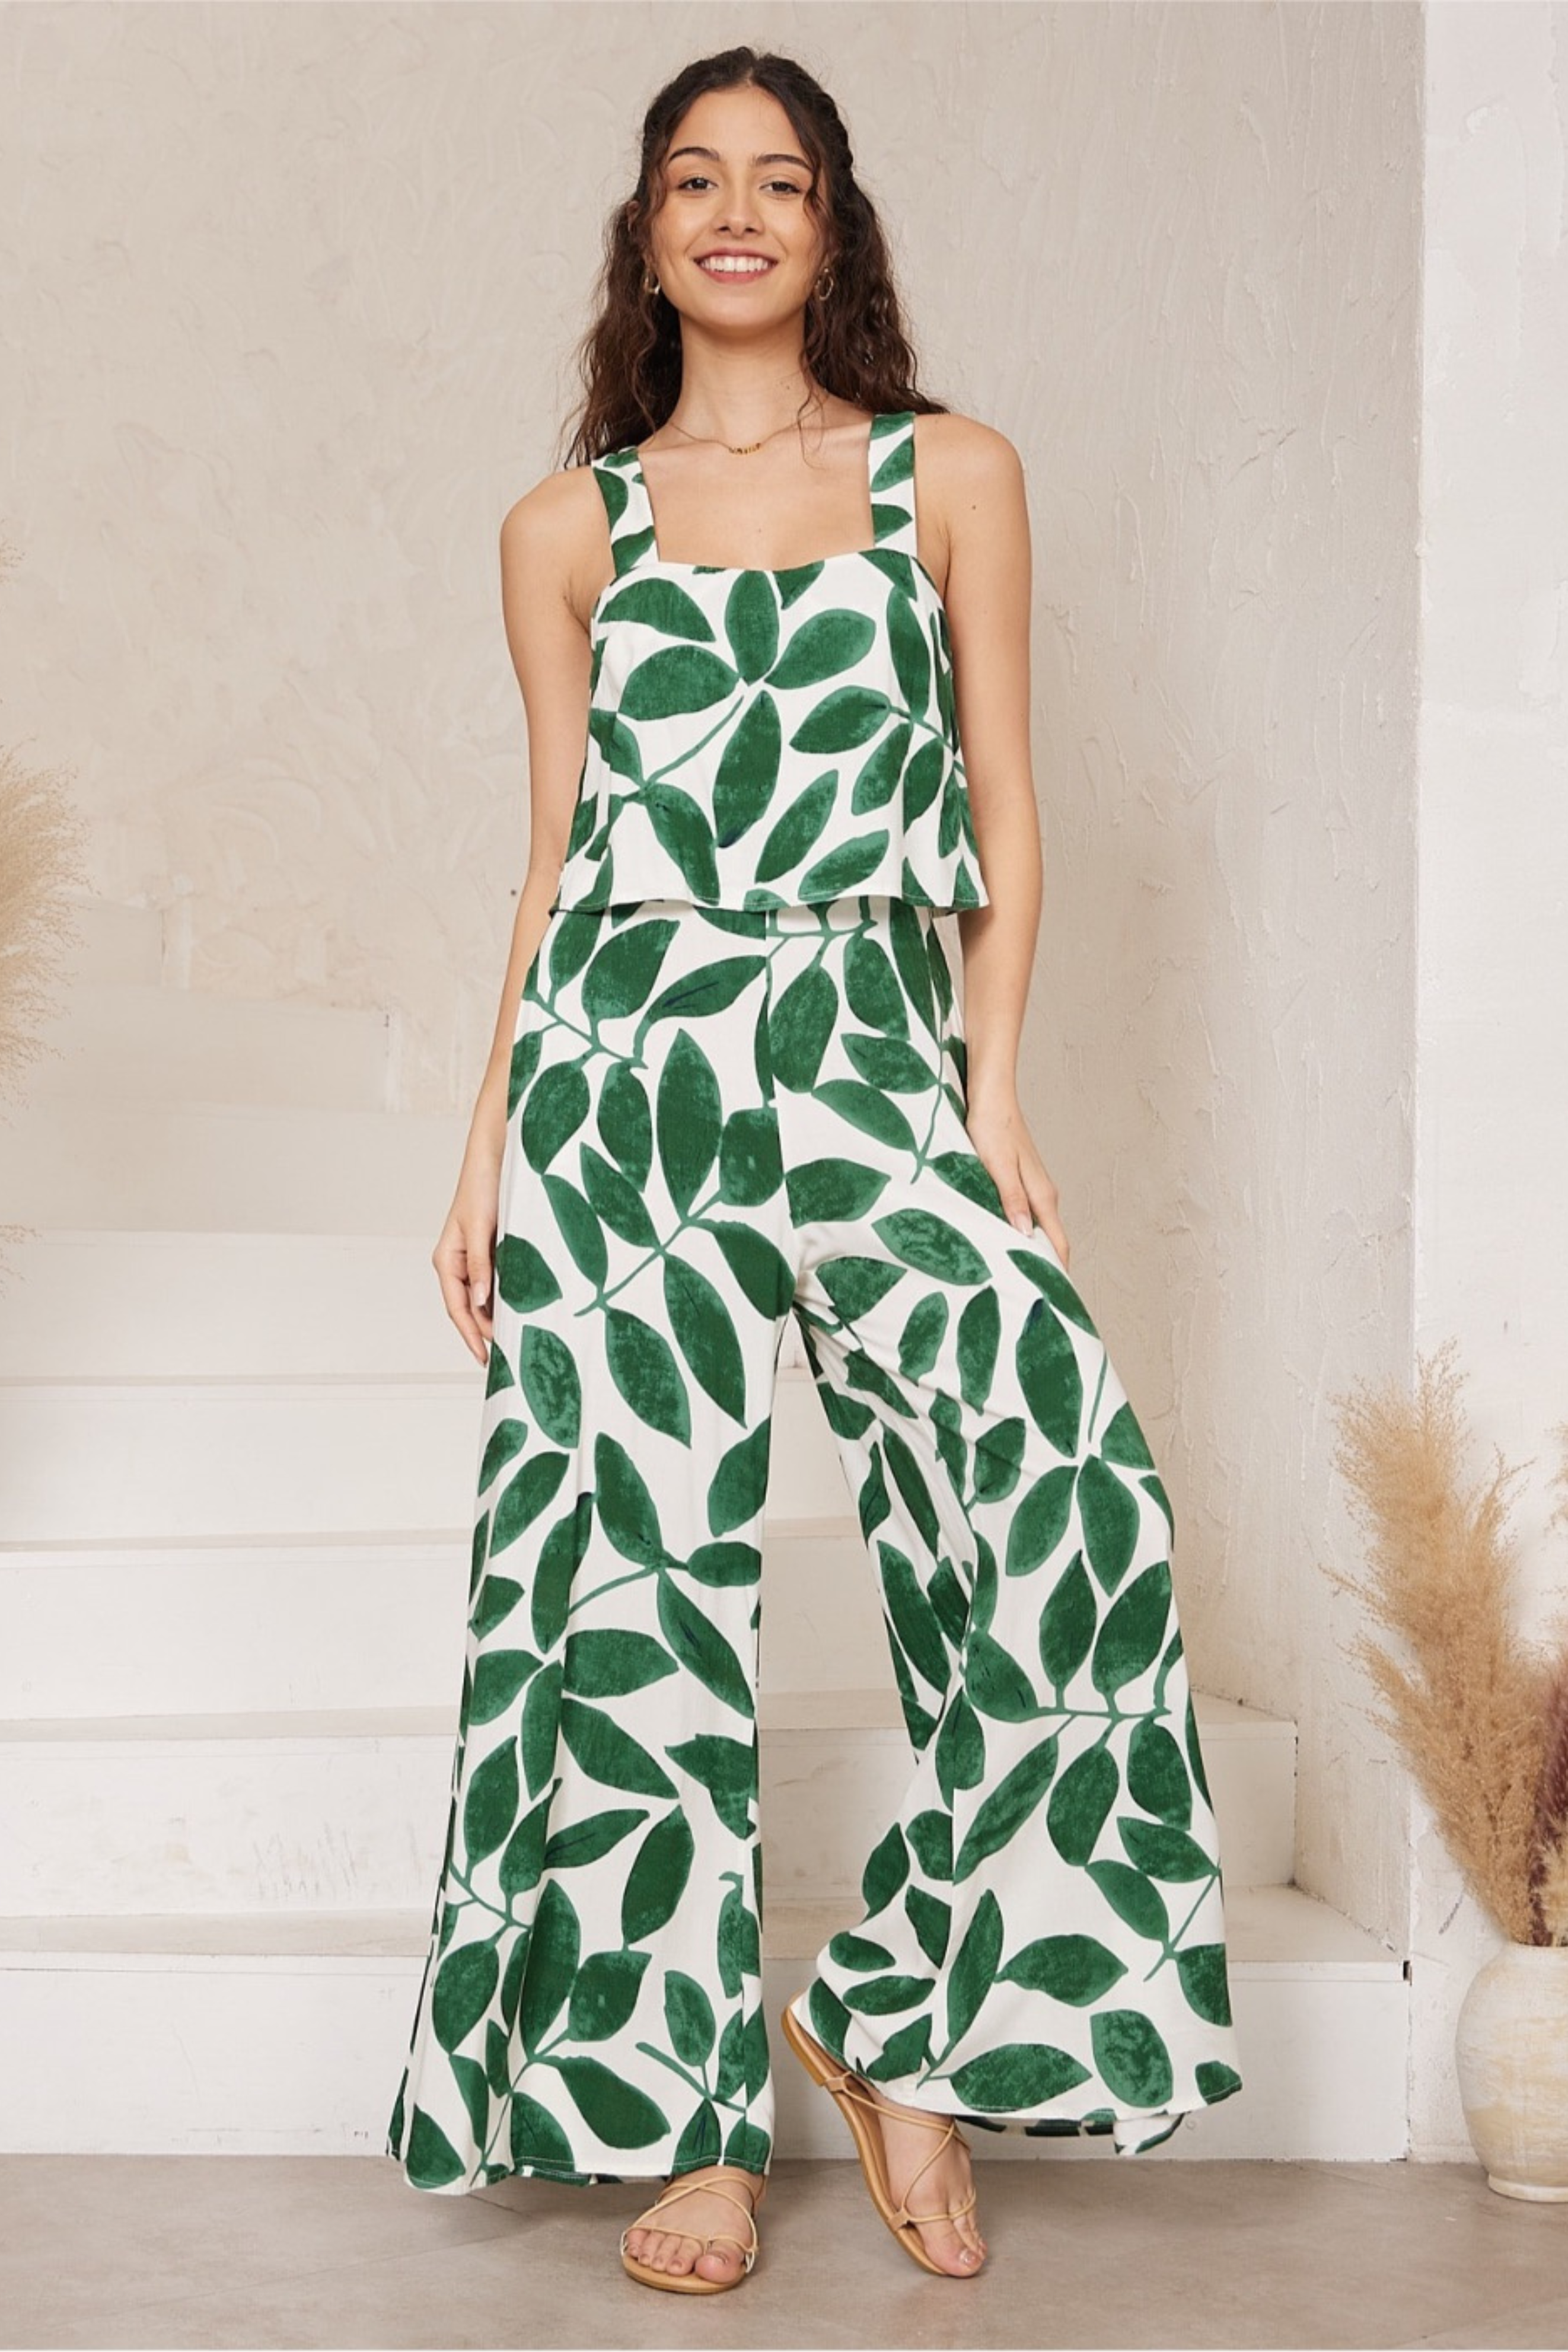 KOKO Jumpsuit in White and Green